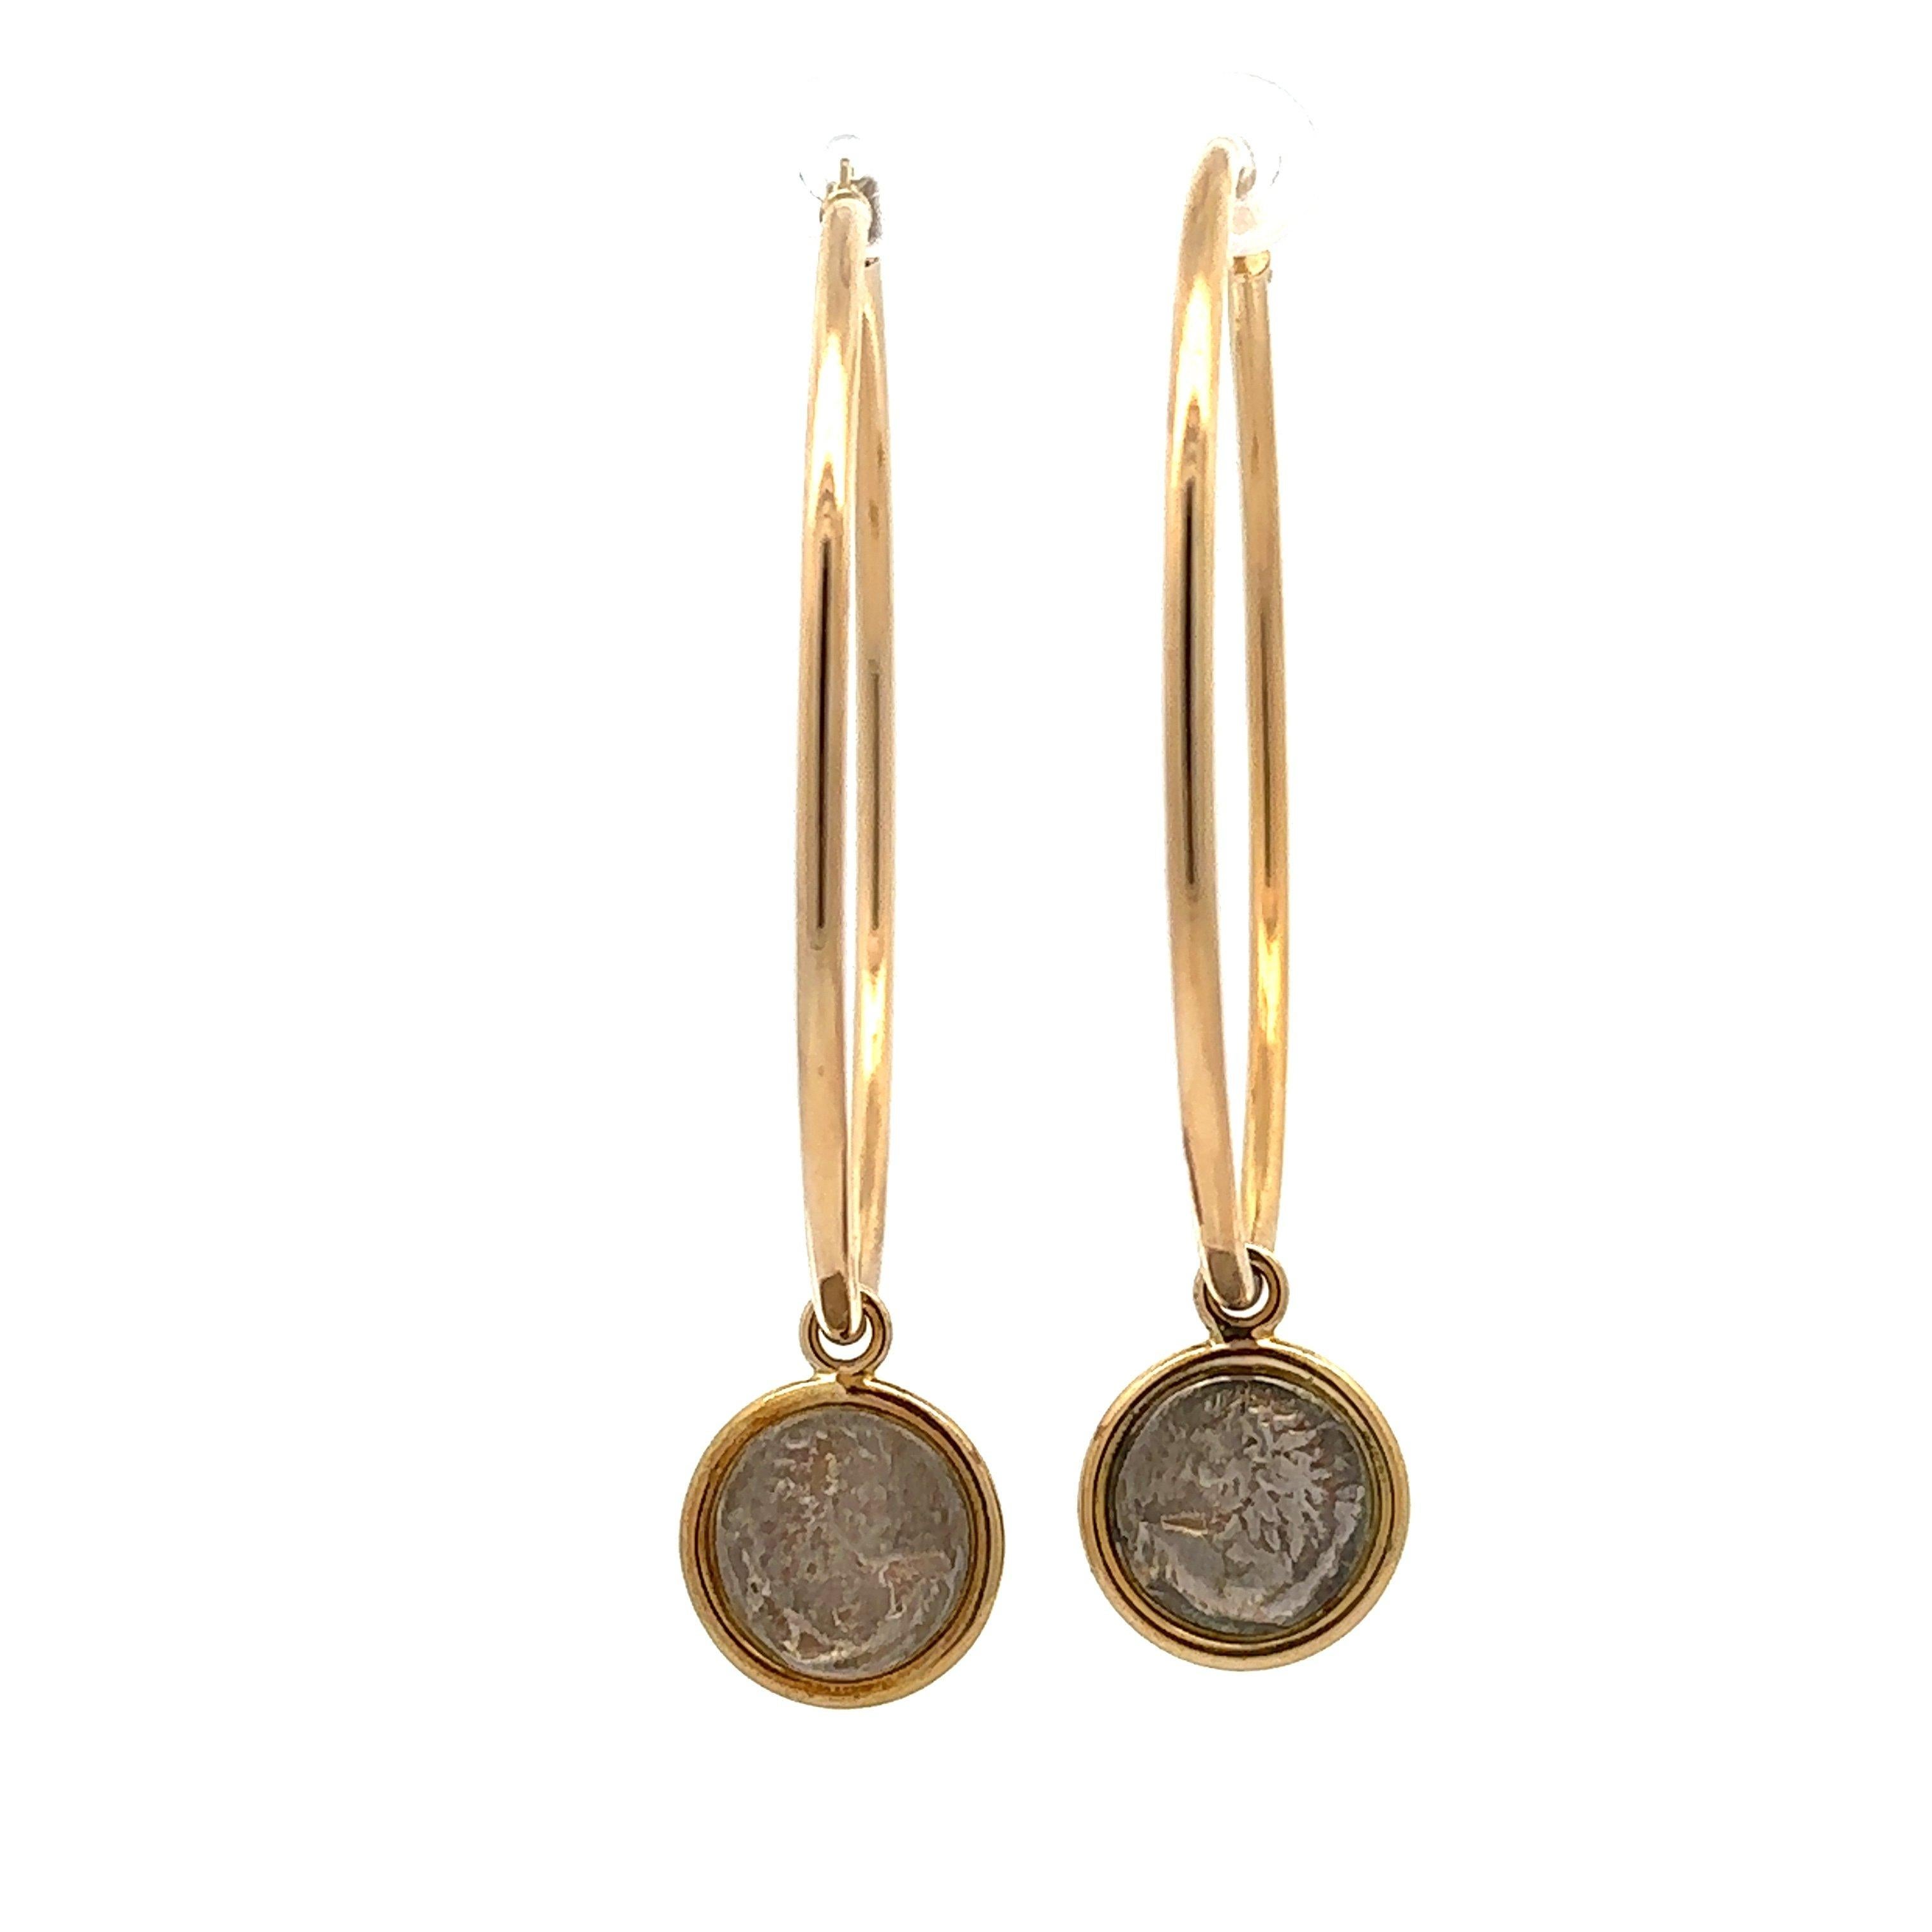 These signature Dubini hoop earrings are handmade in Rome and crafted in 18KT yellow gold. They feature bezel-set silver replicas of Thracian silver coins minted circa 4th century B.C.  The large hoops measure 50mm in diameter x 2mm wide. The